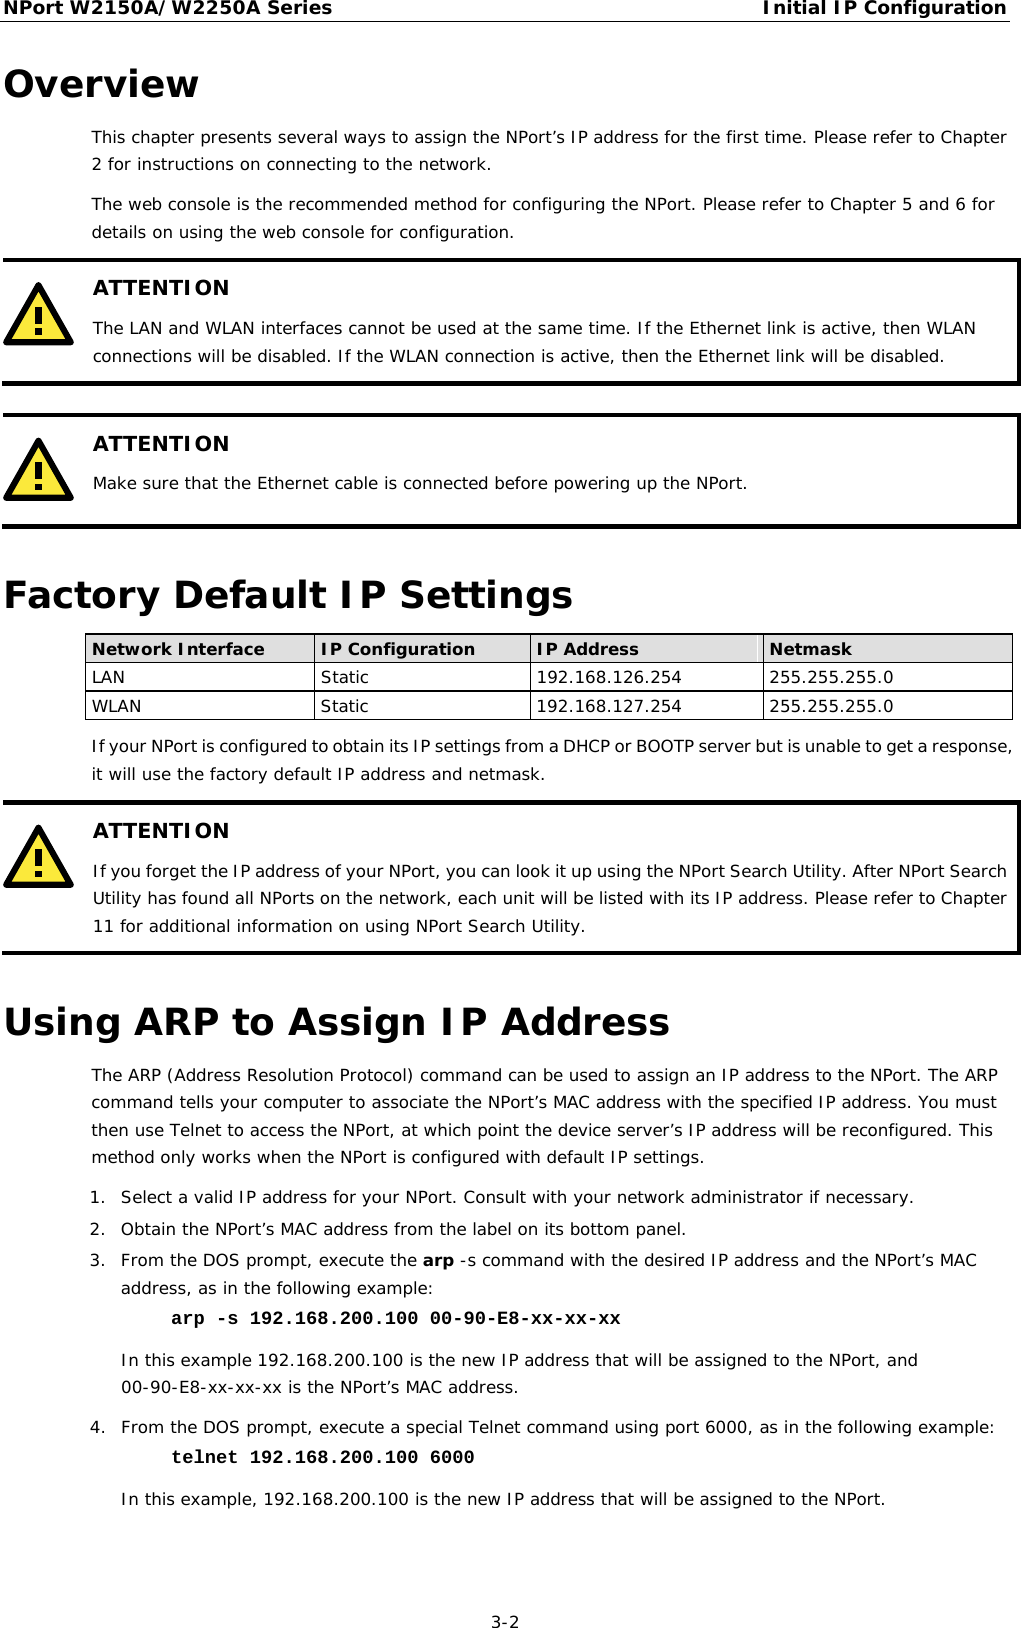 NPort W2150A/W2250A Series Initial IP Configuration  3-2 Overview This chapter presents several ways to assign the NPort’s IP address for the first time. Please refer to Chapter 2 for instructions on connecting to the network.  The web console is the recommended method for configuring the NPort. Please refer to Chapter 5 and 6 for details on using the web console for configuration.  ATTENTION The LAN and WLAN interfaces cannot be used at the same time. If the Ethernet link is active, then WLAN connections will be disabled. If the WLAN connection is active, then the Ethernet link will be disabled.    ATTENTION Make sure that the Ethernet cable is connected before powering up the NPort.  Factory Default IP Settings Network Interface IP Configuration IP Address Netmask LAN Static 192.168.126.254 255.255.255.0 WLAN Static 192.168.127.254 255.255.255.0 If your NPort is configured to obtain its IP settings from a DHCP or BOOTP server but is unable to get a response, it will use the factory default IP address and netmask.  ATTENTION If you forget the IP address of your NPort, you can look it up using the NPort Search Utility. After NPort Search Utility has found all NPorts on the network, each unit will be listed with its IP address. Please refer to Chapter 11 for additional information on using NPort Search Utility.  Using ARP to Assign IP Address The ARP (Address Resolution Protocol) command can be used to assign an IP address to the NPort. The ARP command tells your computer to associate the NPort’s MAC address with the specified IP address. You must then use Telnet to access the NPort, at which point the device server’s IP address will be reconfigured. This method only works when the NPort is configured with default IP settings. 1. Select a valid IP address for your NPort. Consult with your network administrator if necessary. 2. Obtain the NPort’s MAC address from the label on its bottom panel. 3. From the DOS prompt, execute the arp -s command with the desired IP address and the NPort’s MAC address, as in the following example: arp -s 192.168.200.100 00-90-E8-xx-xx-xx In this example 192.168.200.100 is the new IP address that will be assigned to the NPort, and 00-90-E8-xx-xx-xx is the NPort’s MAC address. 4. From the DOS prompt, execute a special Telnet command using port 6000, as in the following example: telnet 192.168.200.100 6000 In this example, 192.168.200.100 is the new IP address that will be assigned to the NPort.  